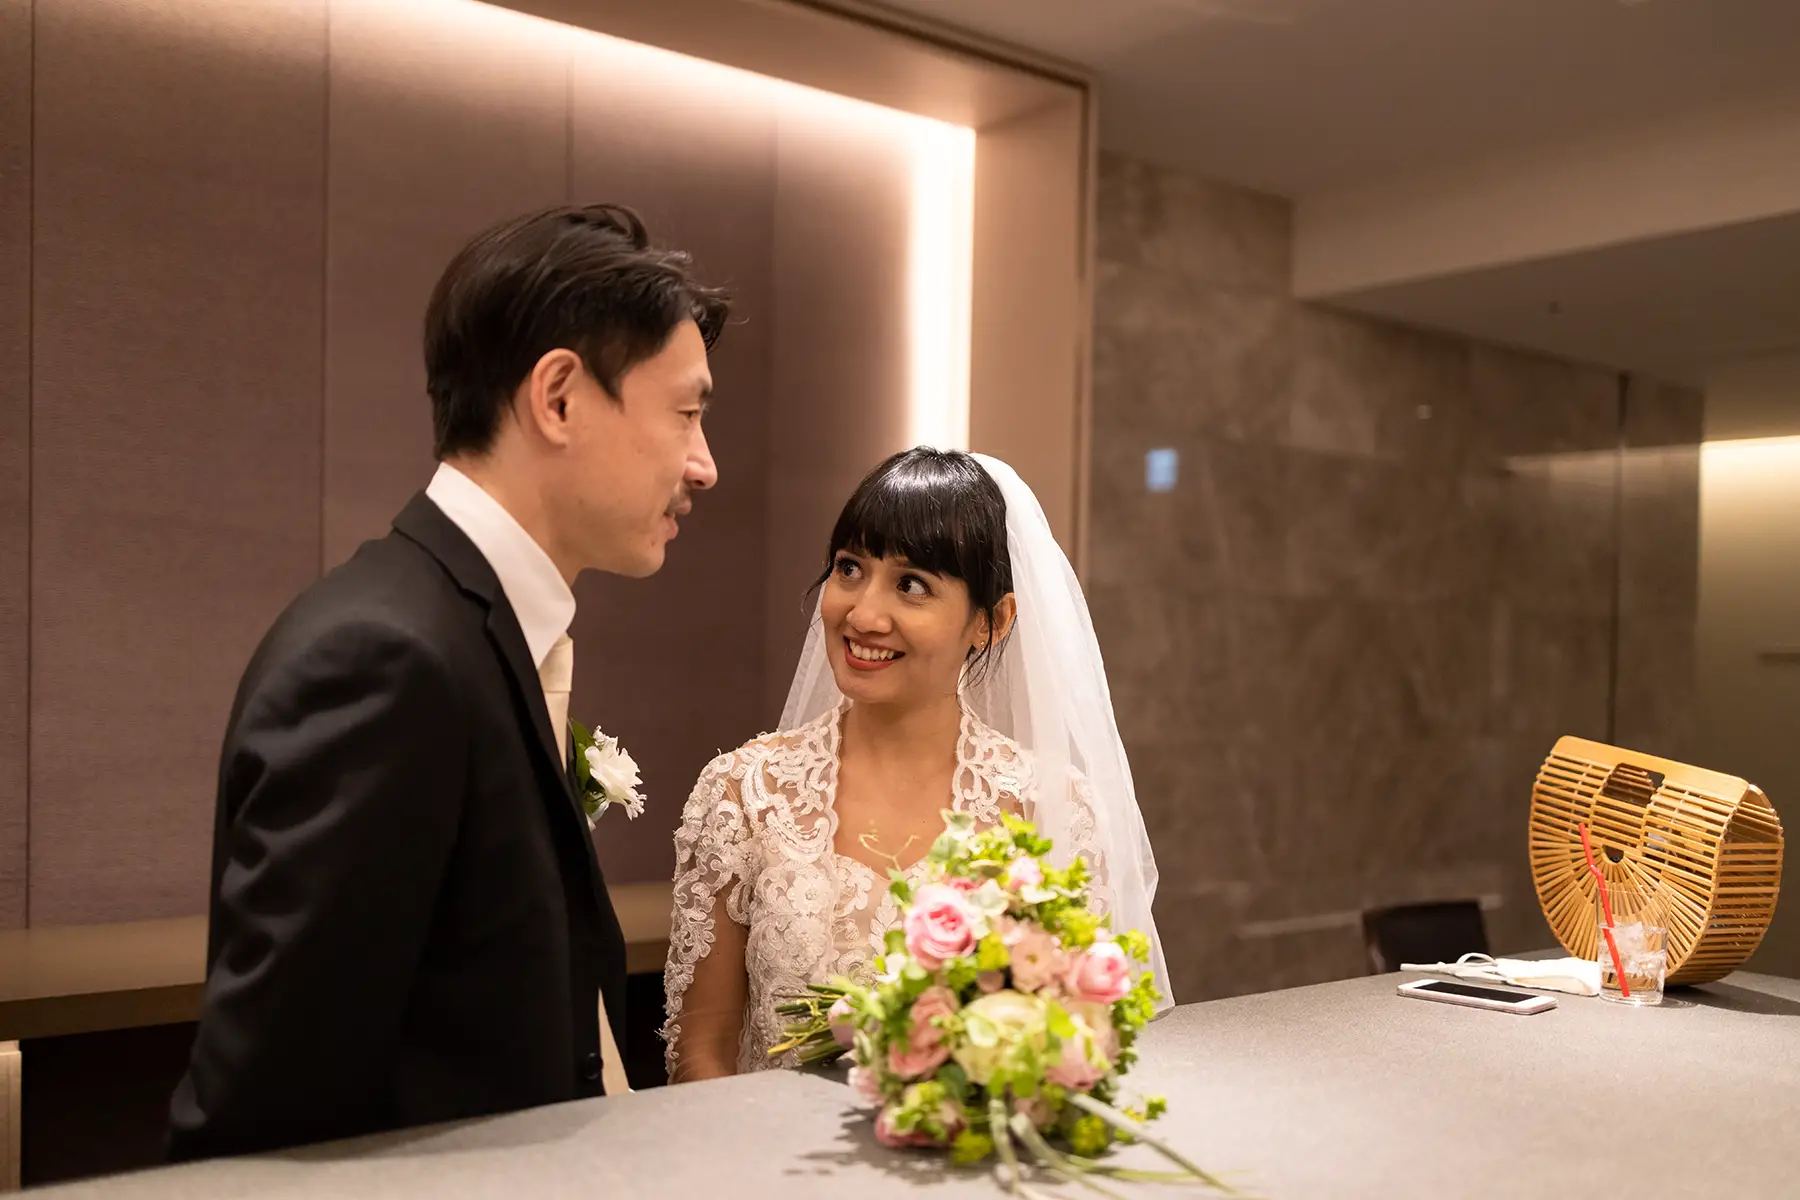 A couple smile at each other during a wedding ceremony